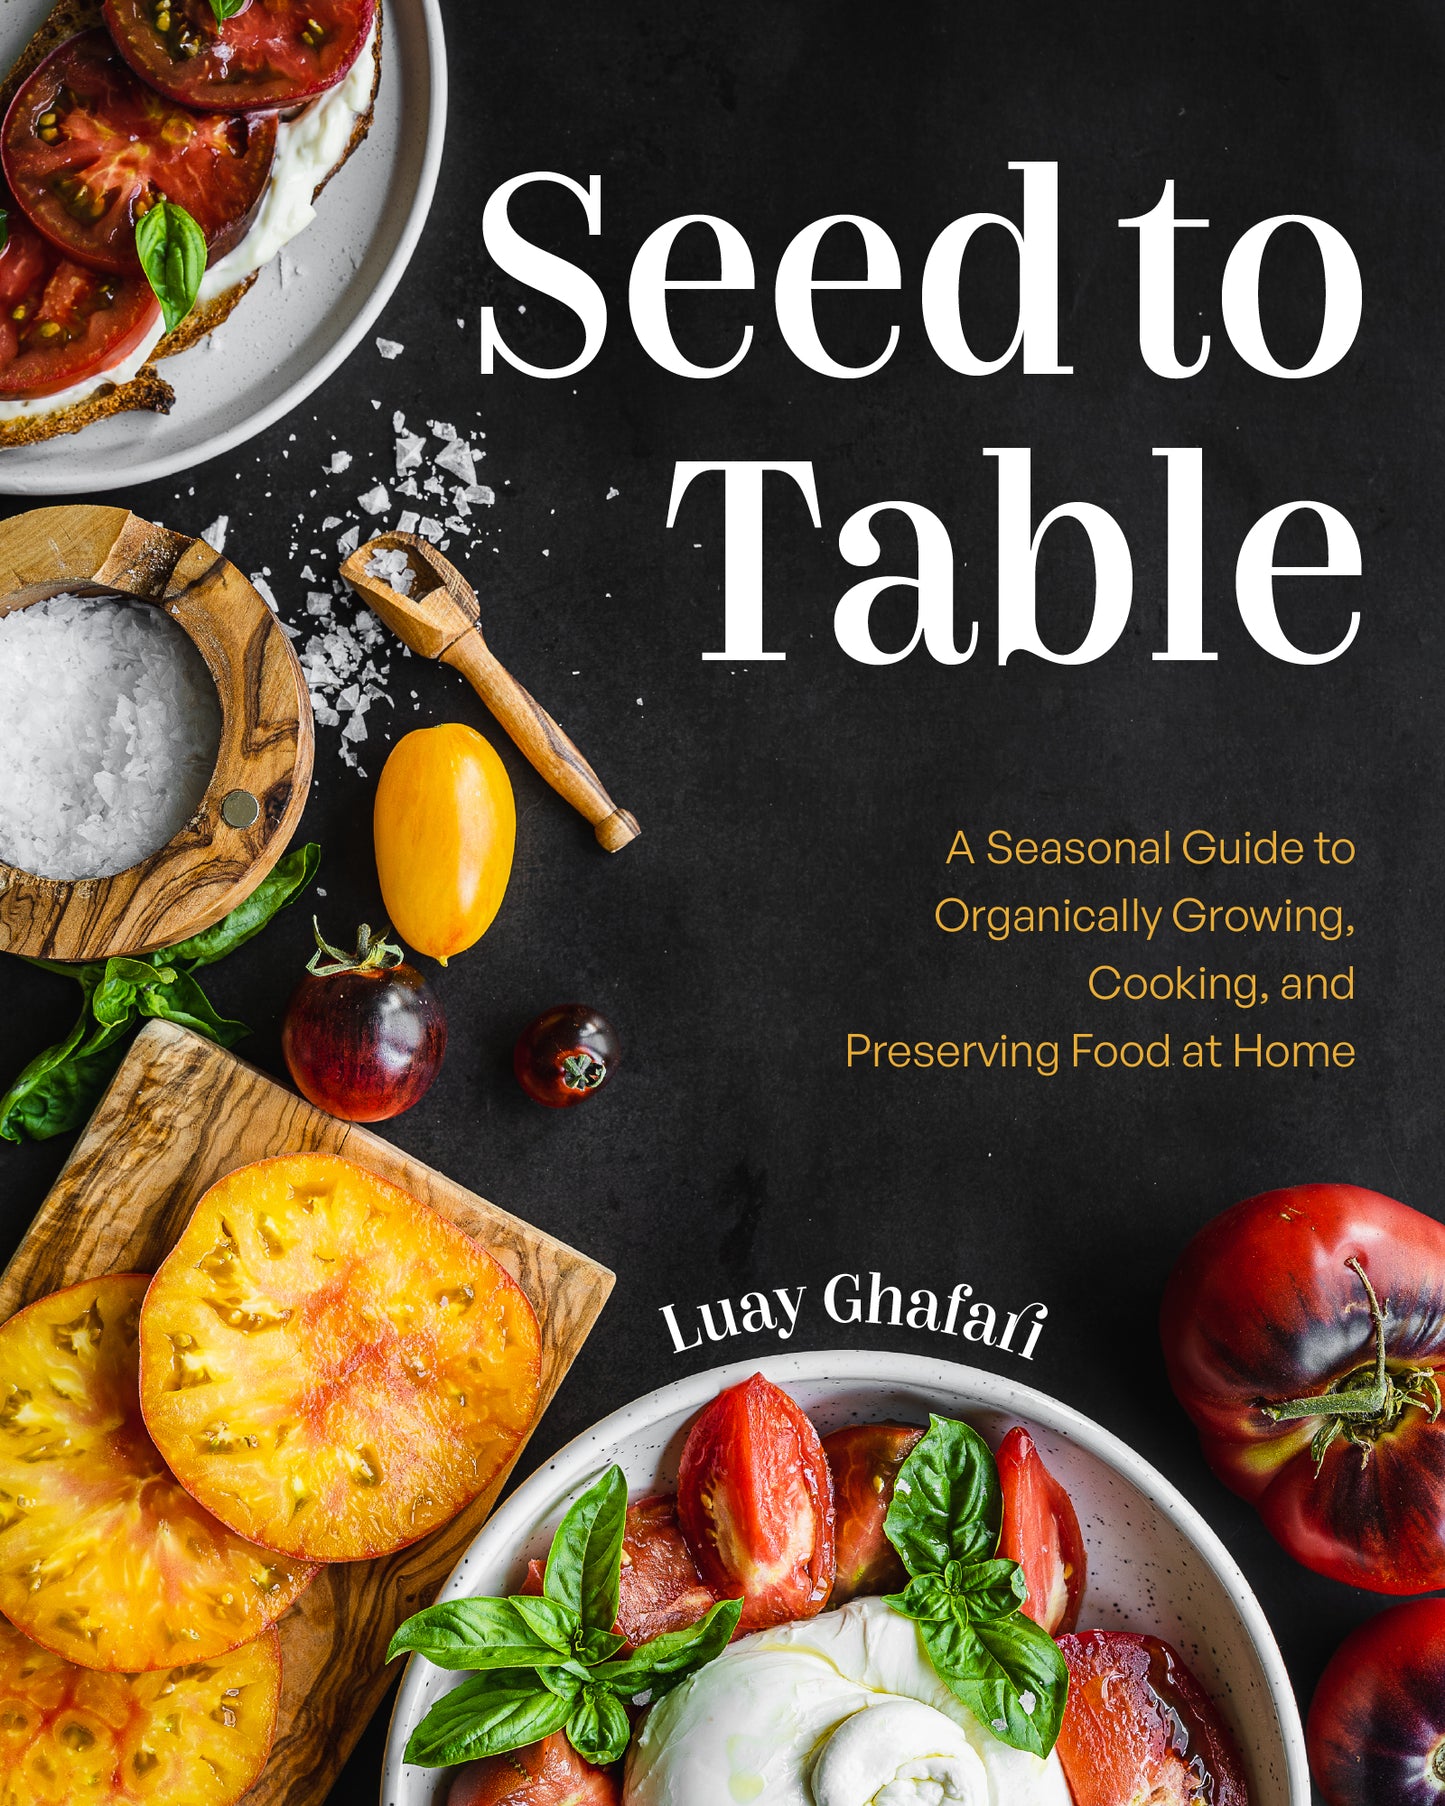 Seed To Table (Signed Copy Bundle)